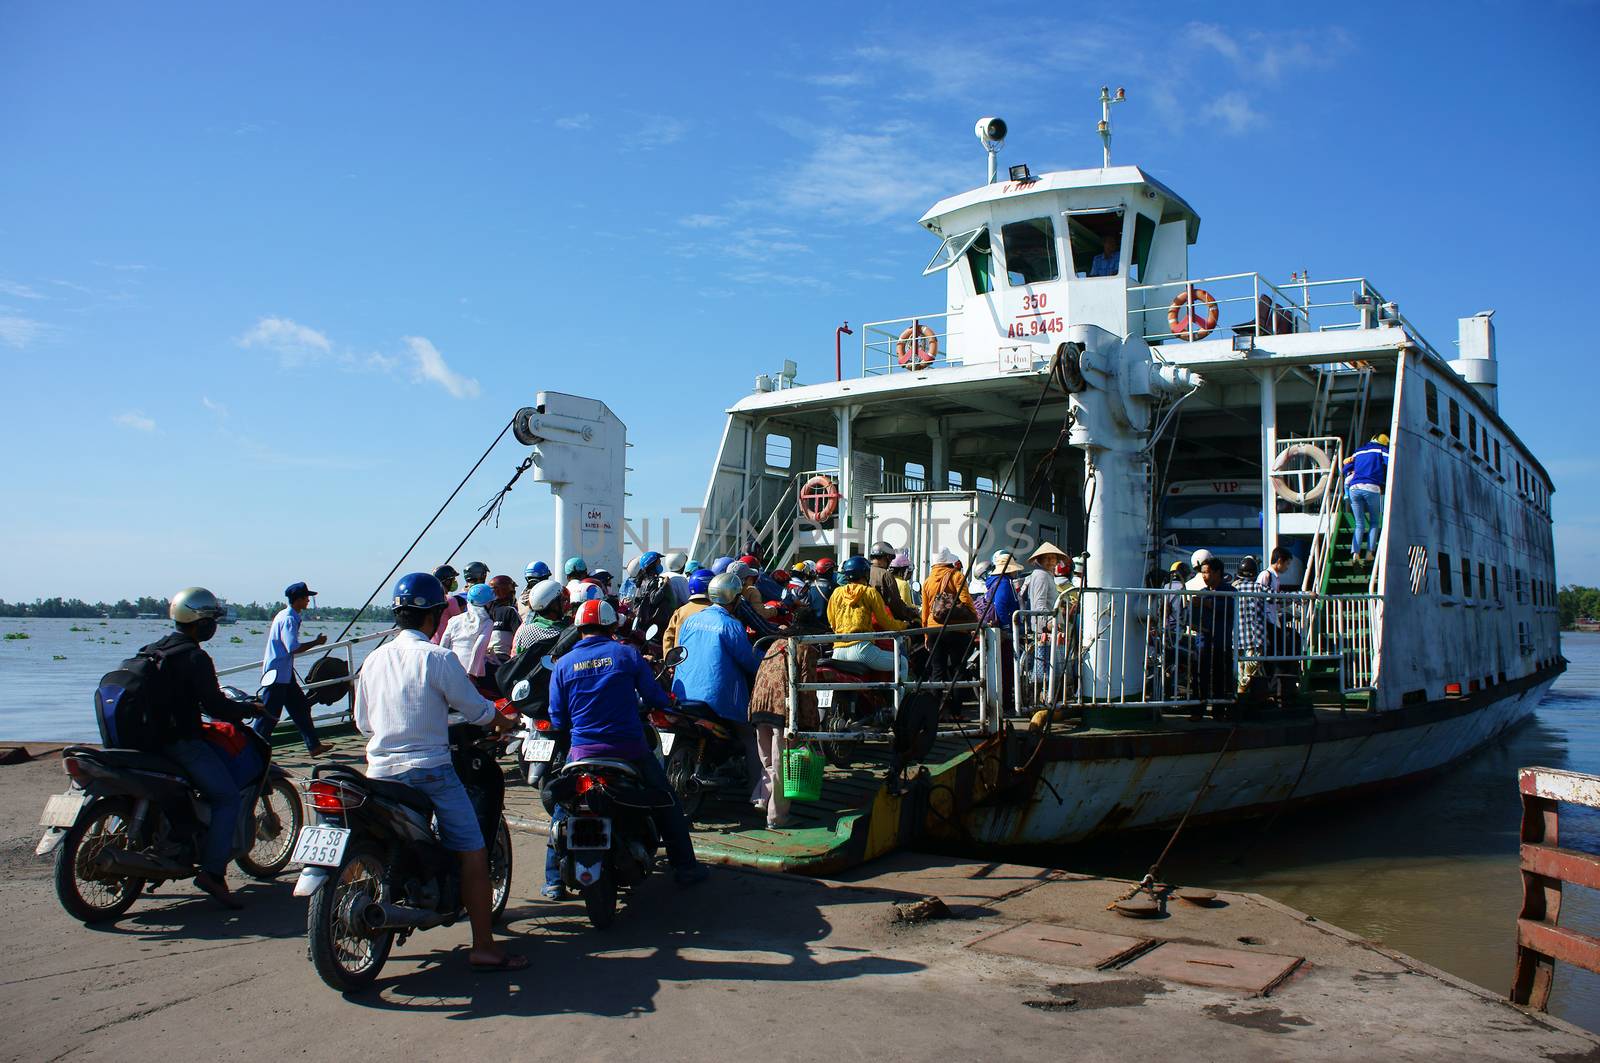 MEKONG DELTA, VIETNAM- JULY 7: Crowd of people wear heltmet sitting on motorbike to cross the river by ferry boat, this is  passenger transport vehicle on water at My Loi ferry, Viet Nam, July 7, 2014